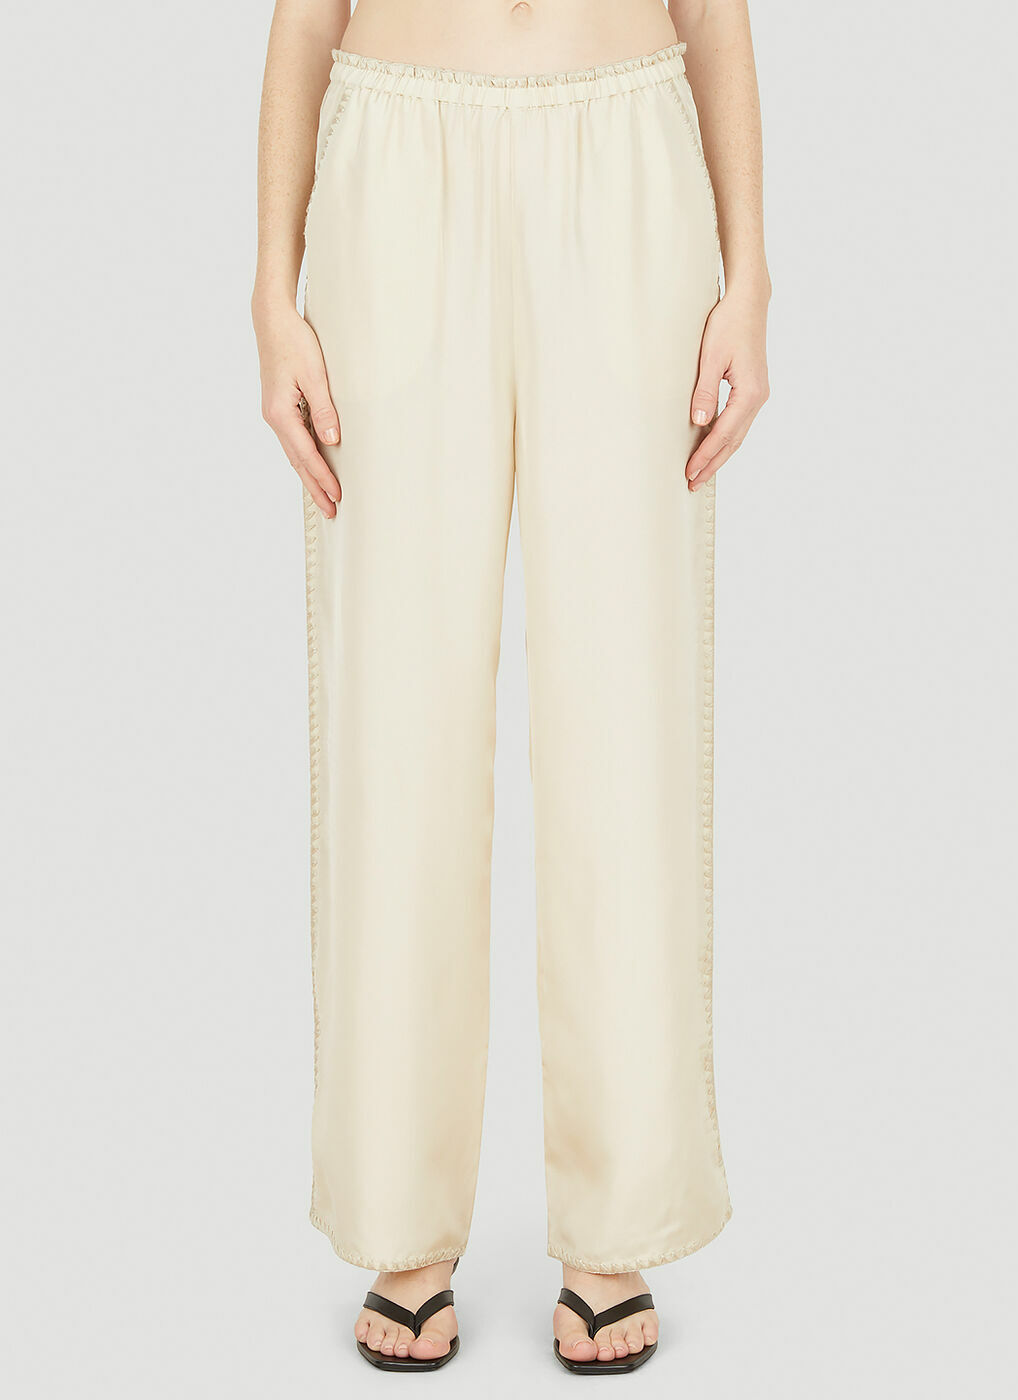 Embroidered Pants in Cream Toteme